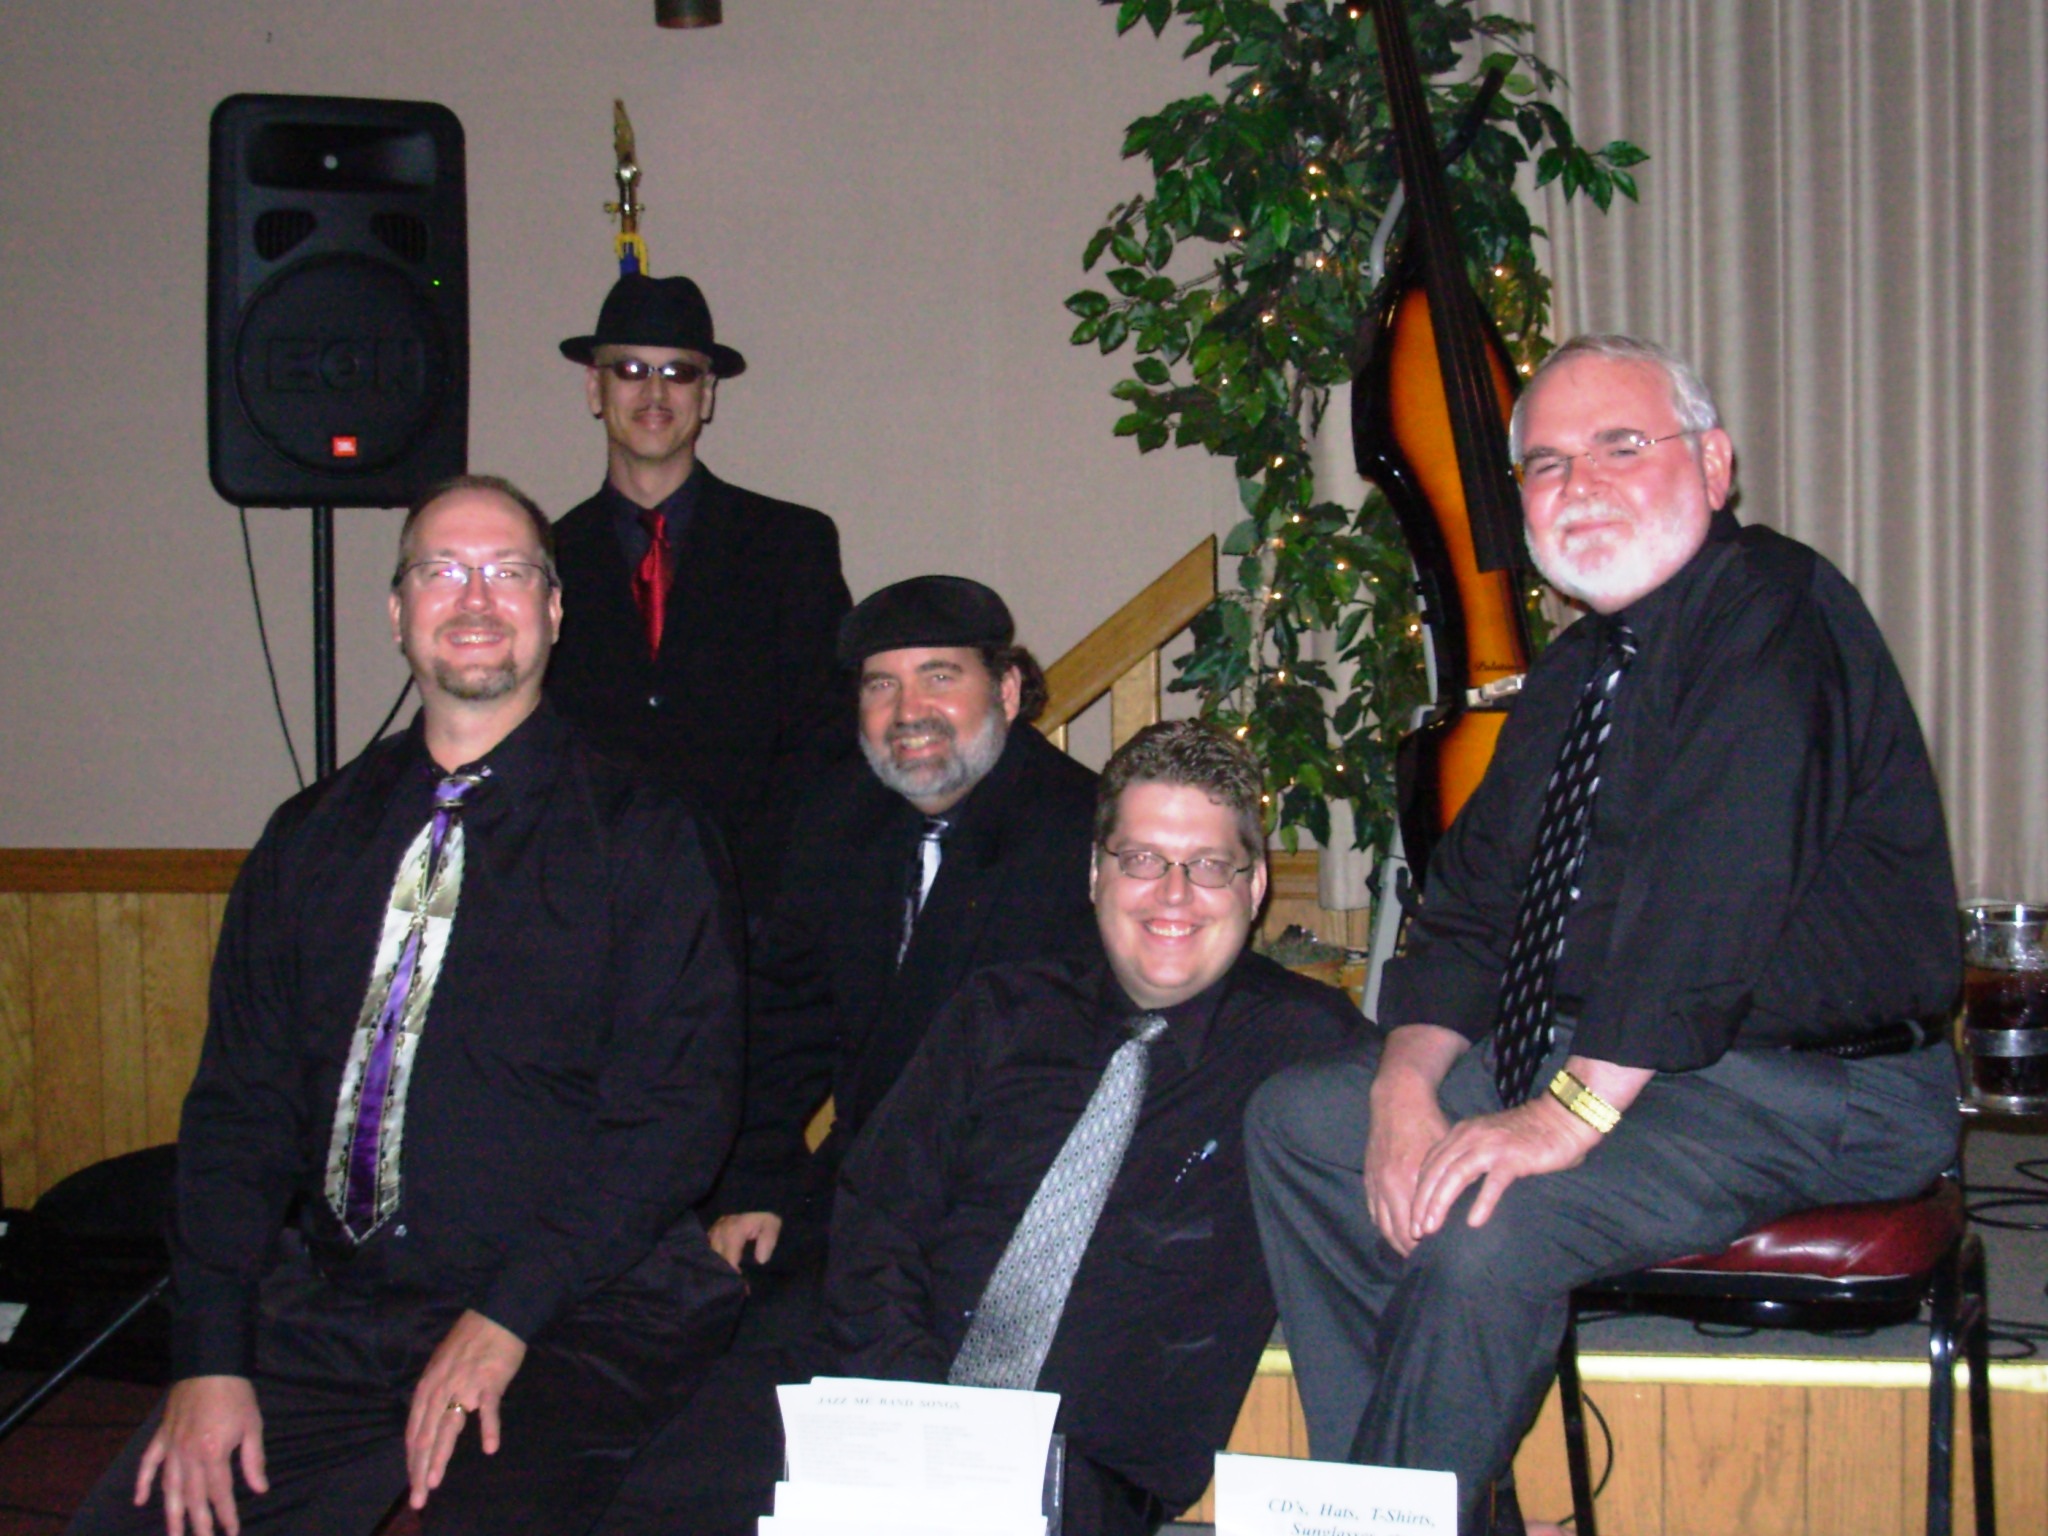 Jazz Me including Ron Rhoads at the Elks Club of Camp Hill
